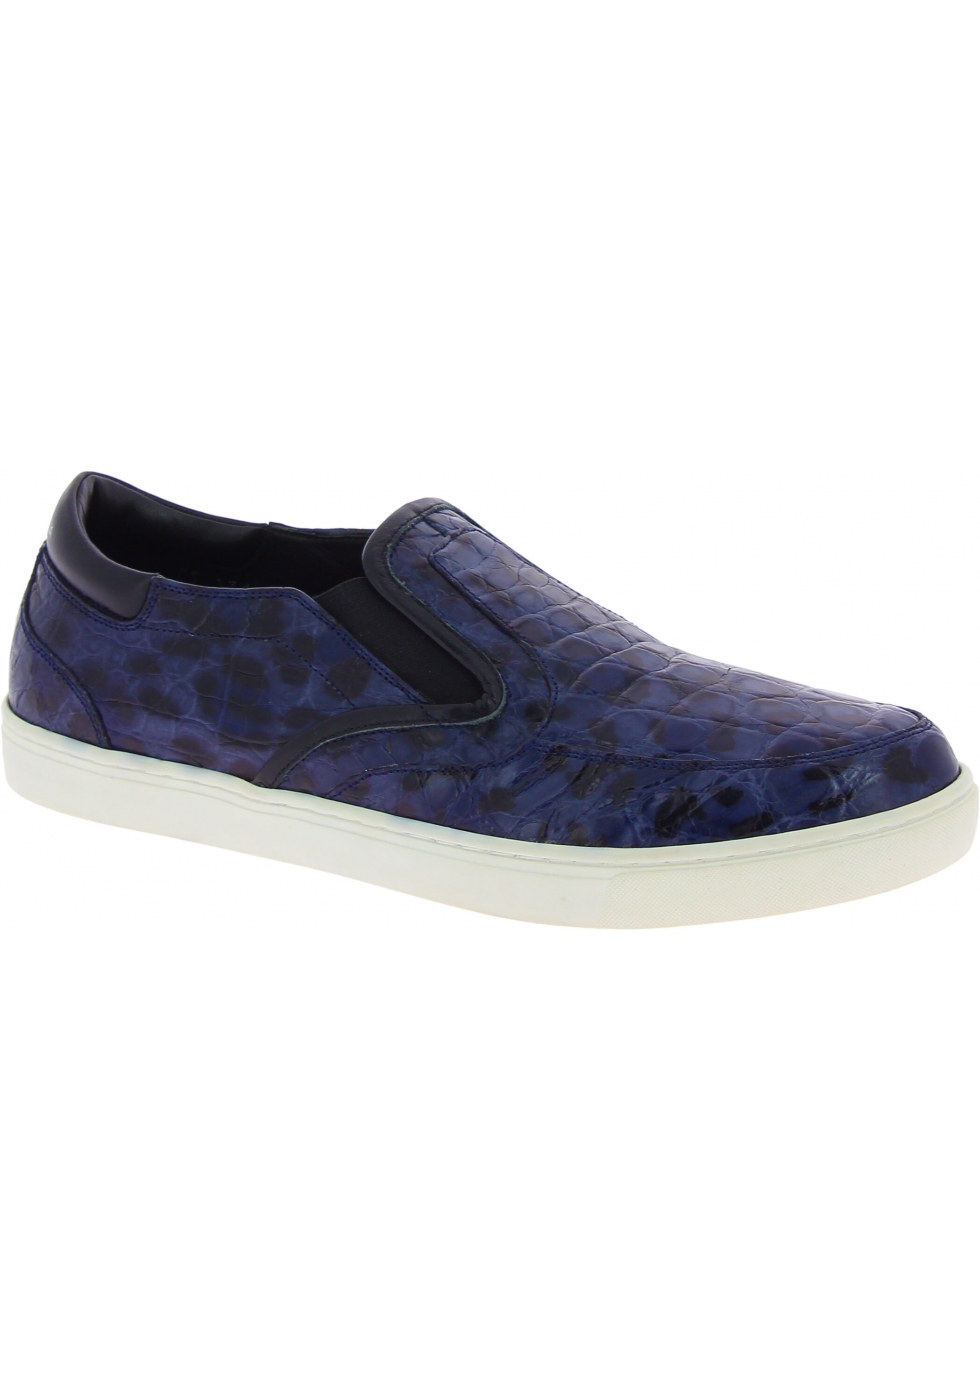 Dolce&Gabbana Men's fashion slip-on sneakers shoes in blue caiman leather - Italian Boutique